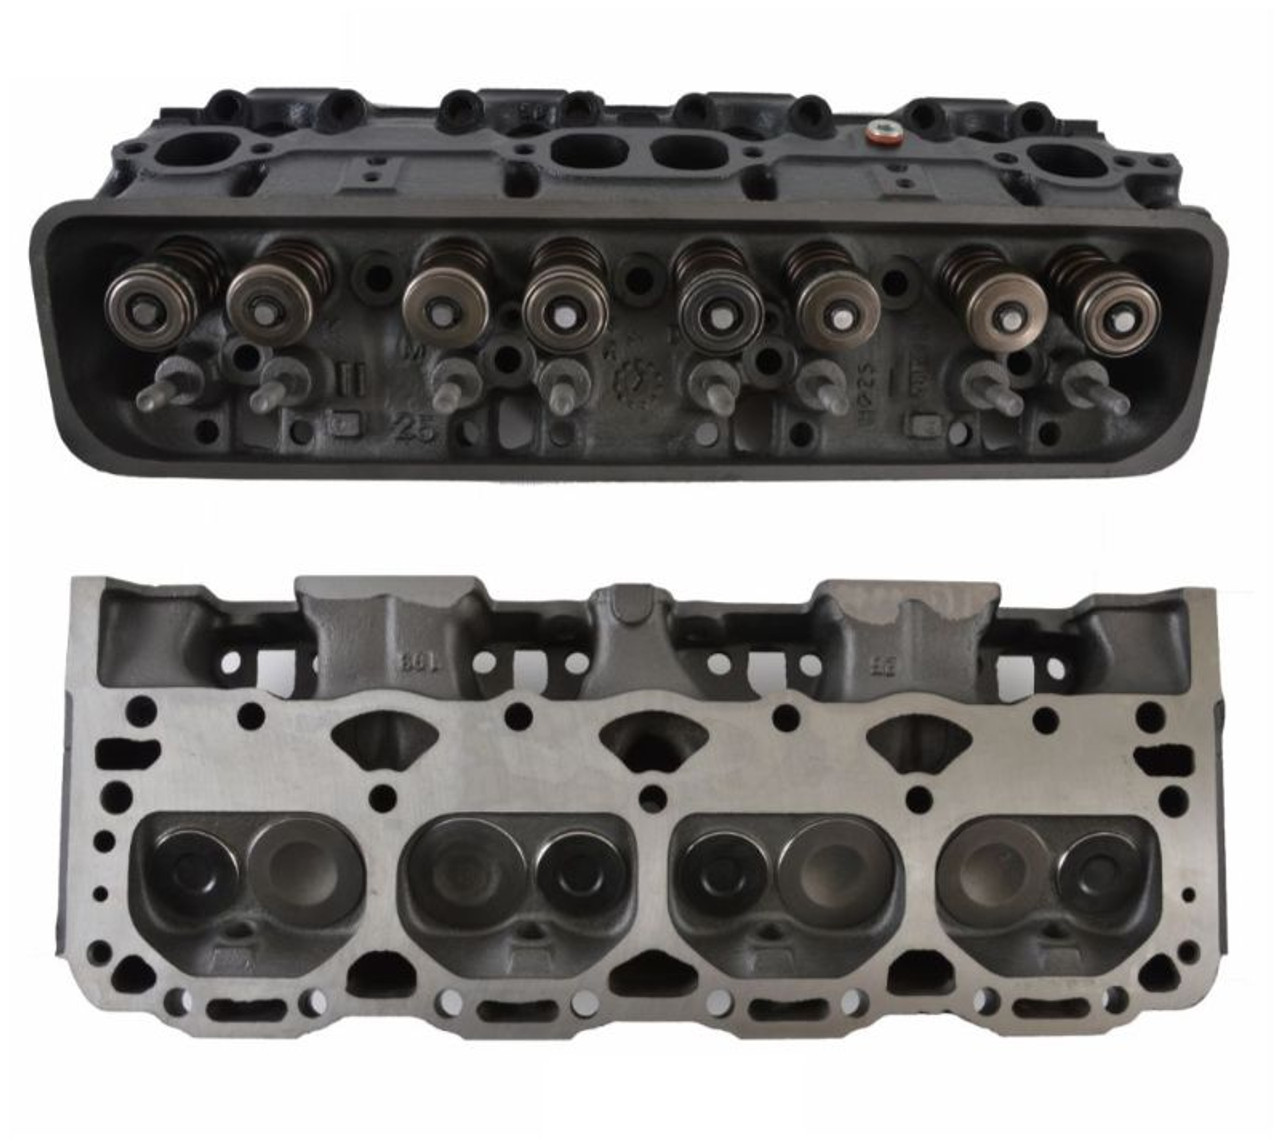 Cylinder Head Assembly - 1988 Chevrolet Caprice 5.7L (CH1065R.D37)